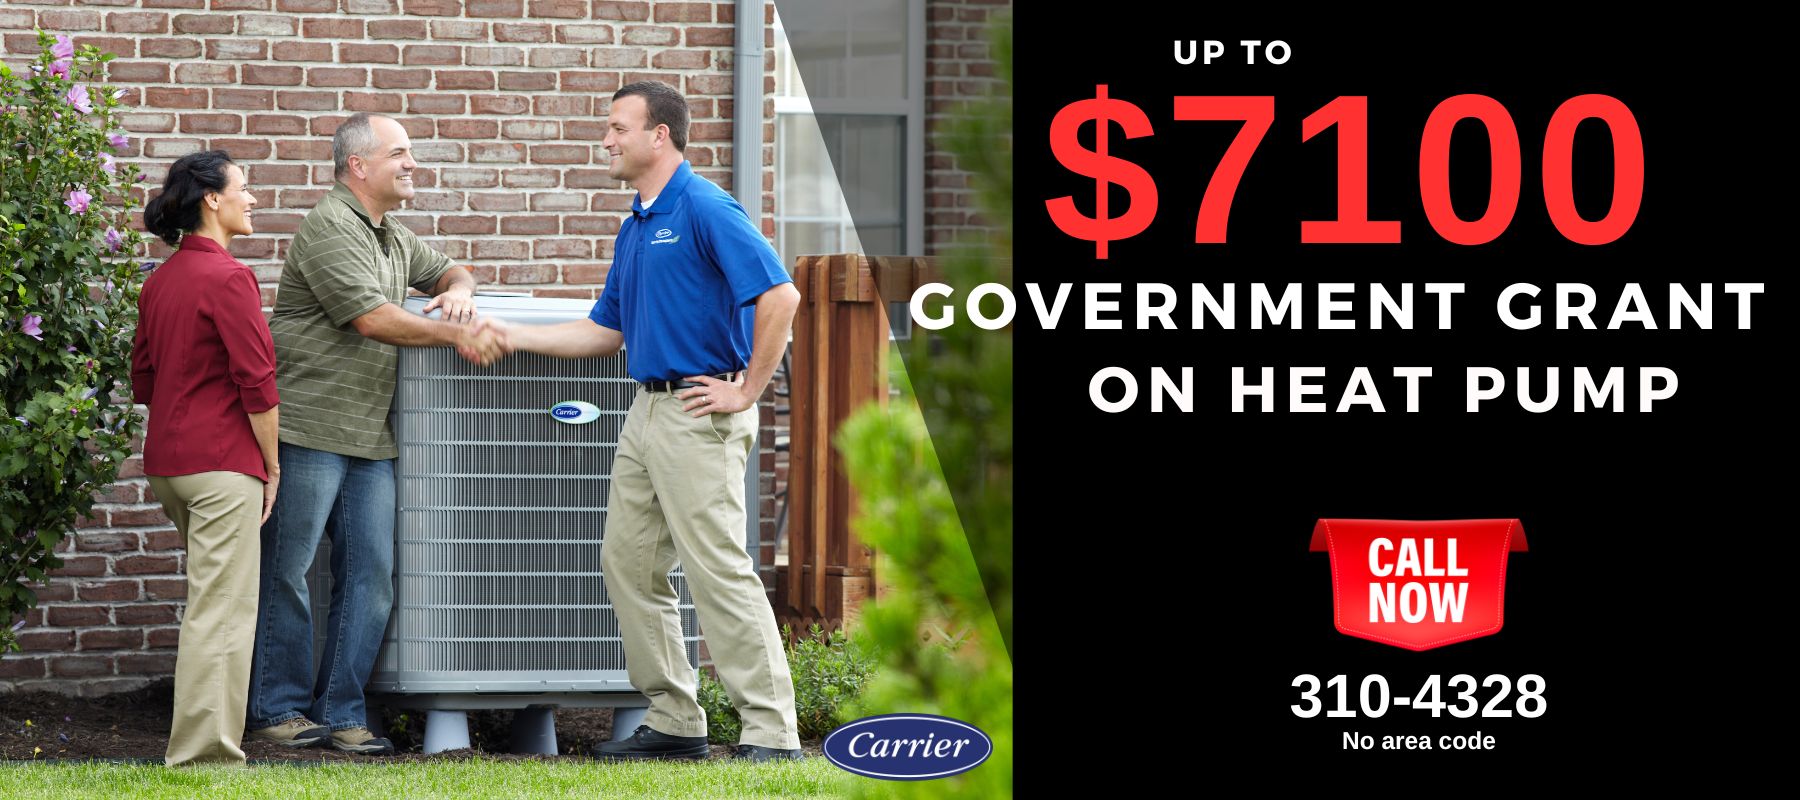 2022-government-heating-cooling-system-rebates-furnaceprices-ca